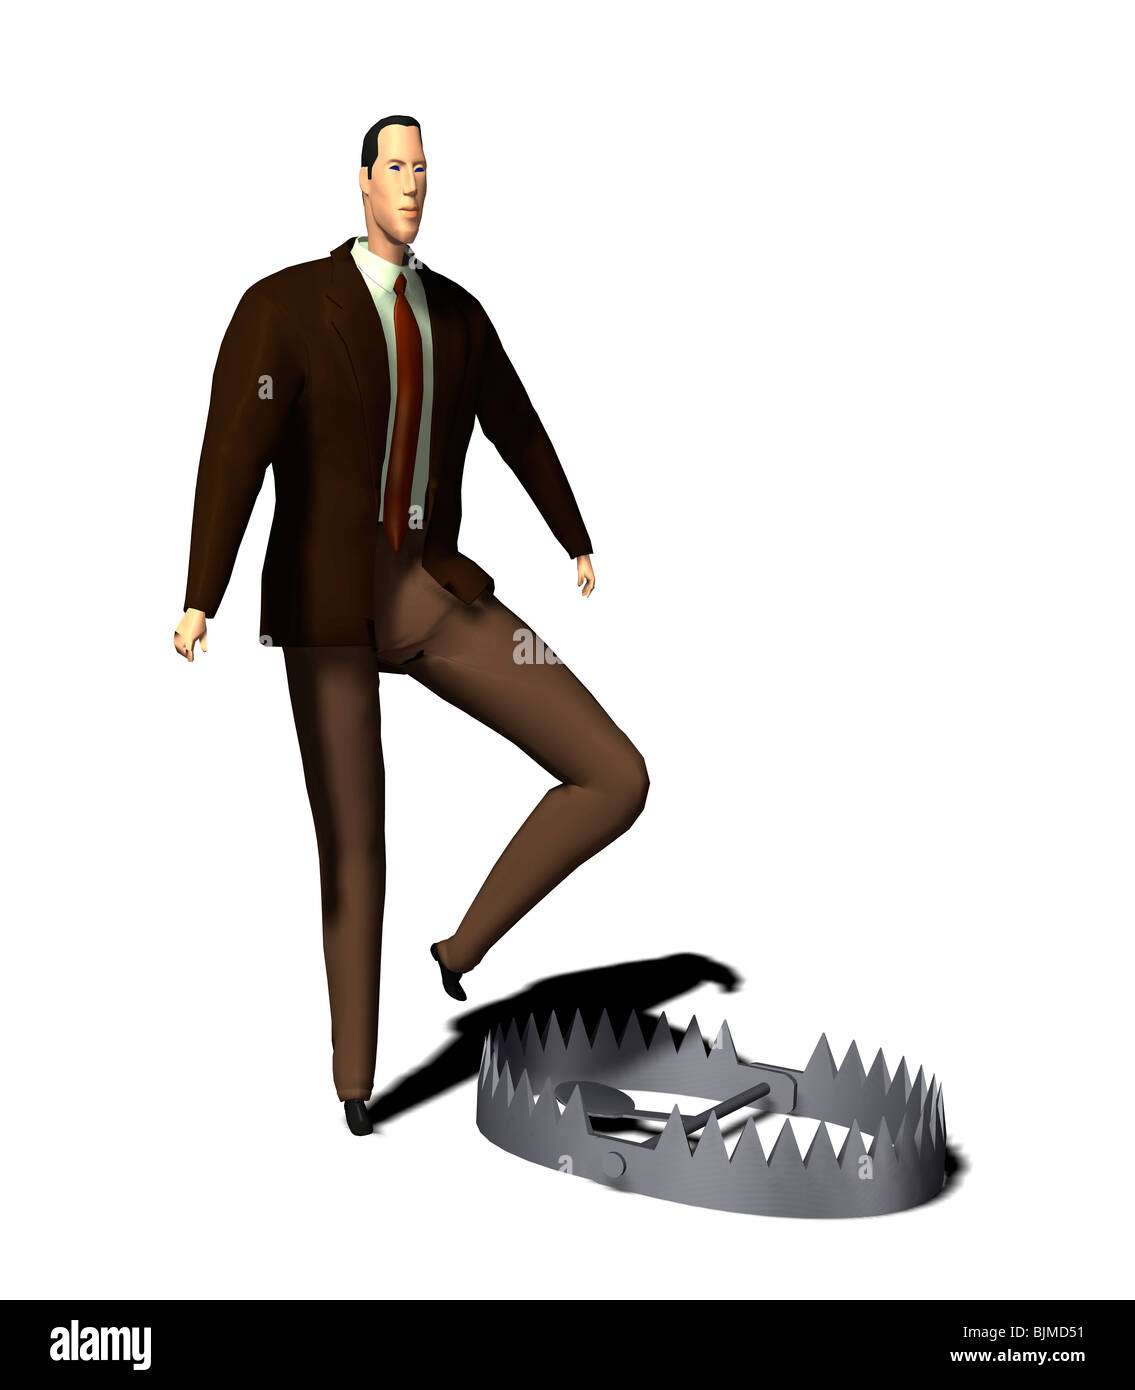 businessman with a trap a symbol for bad business Stock Photo